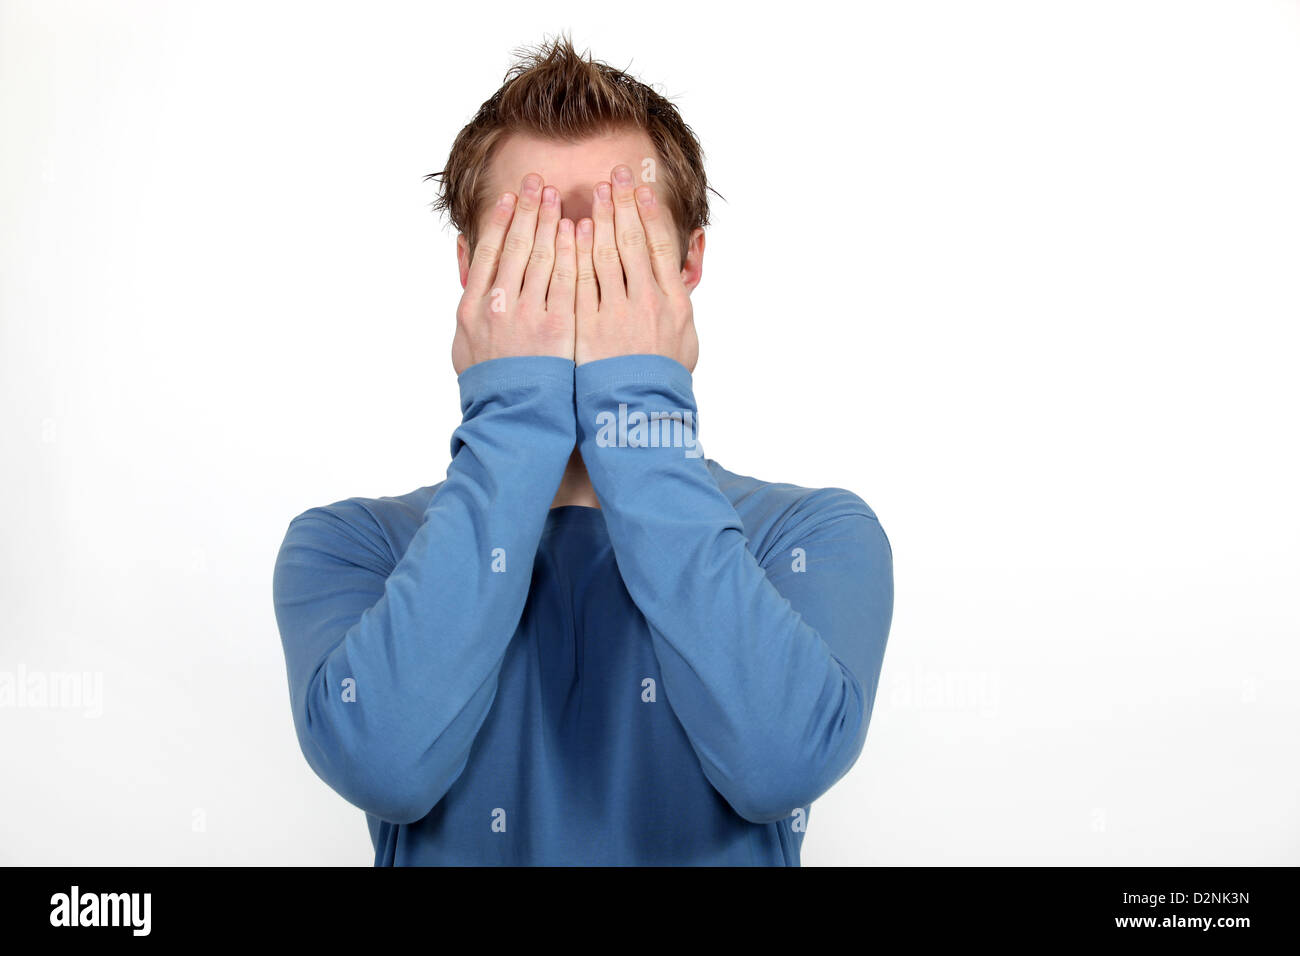 Man covering his face Stock Photo